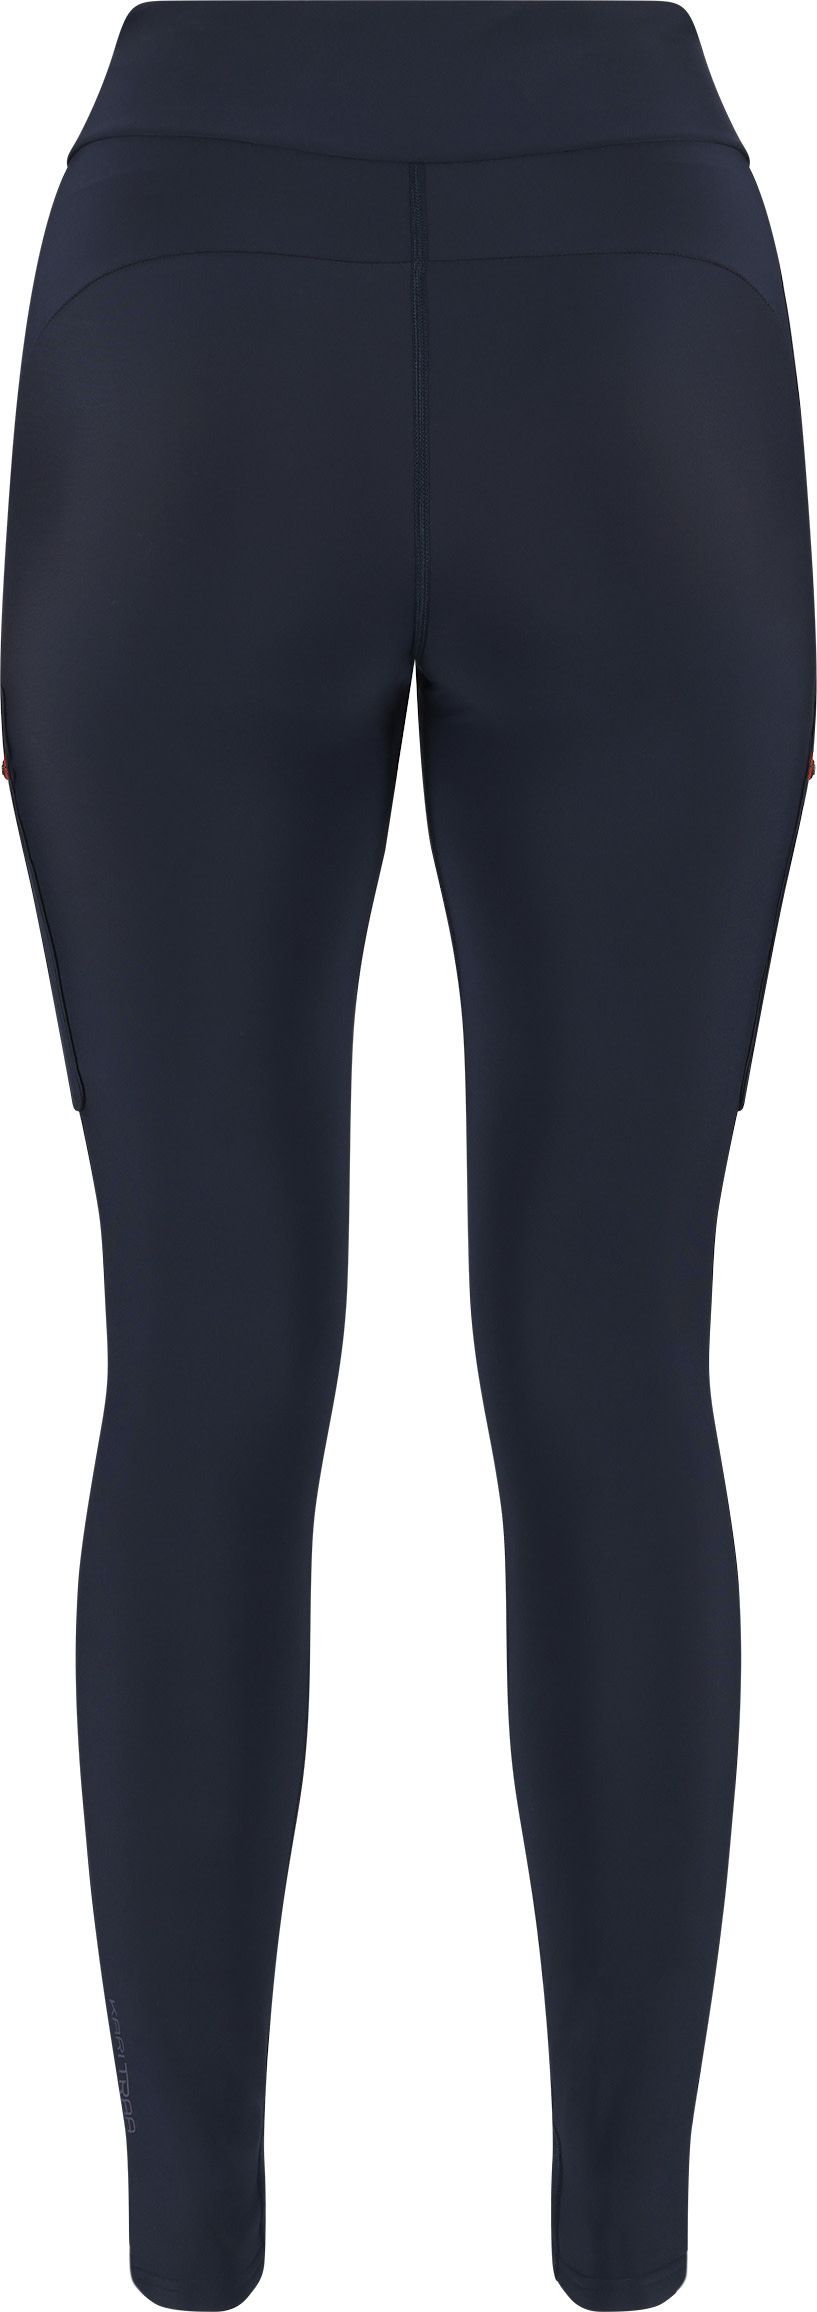 Sanne Thermal Tights